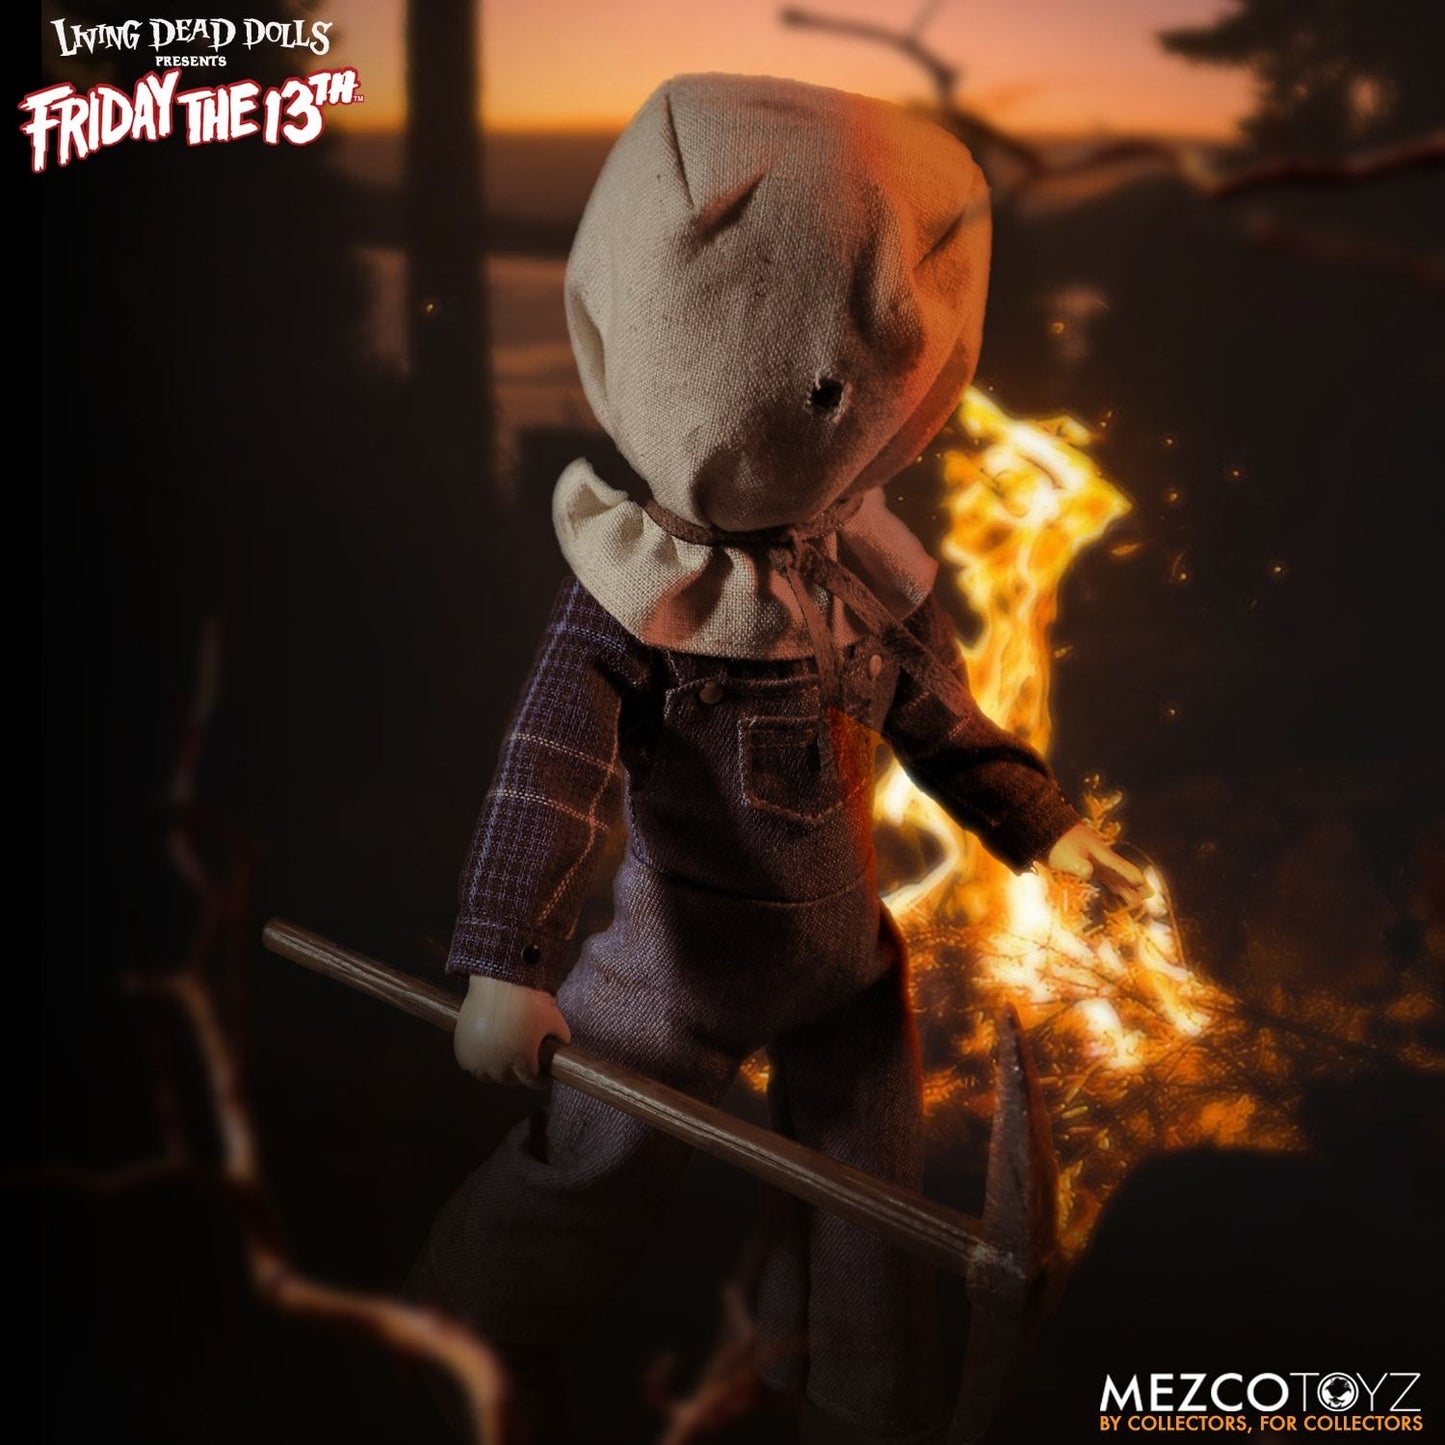 MEZCO TOYZ: LDD Presents - IT 1990: Pennywise 10" Tall Figure: LDD Presents - Deluxe Edition Friday The 13th Part II: Jason Voorhees 10" Tall Figure